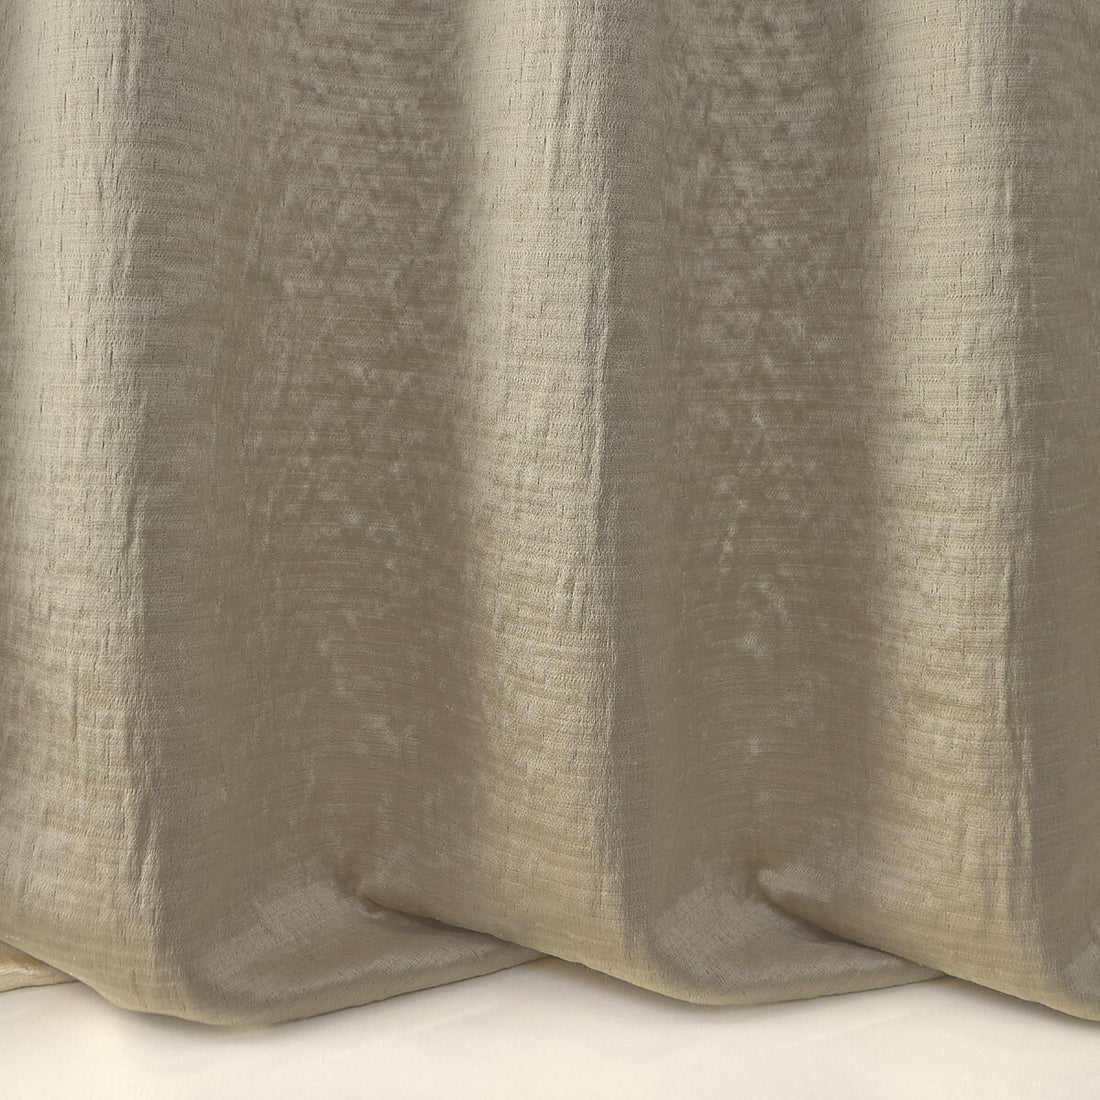 Jade fabric in 6 color - pattern LZ-30376.06.0 - by Kravet Design in the Lizzo collection